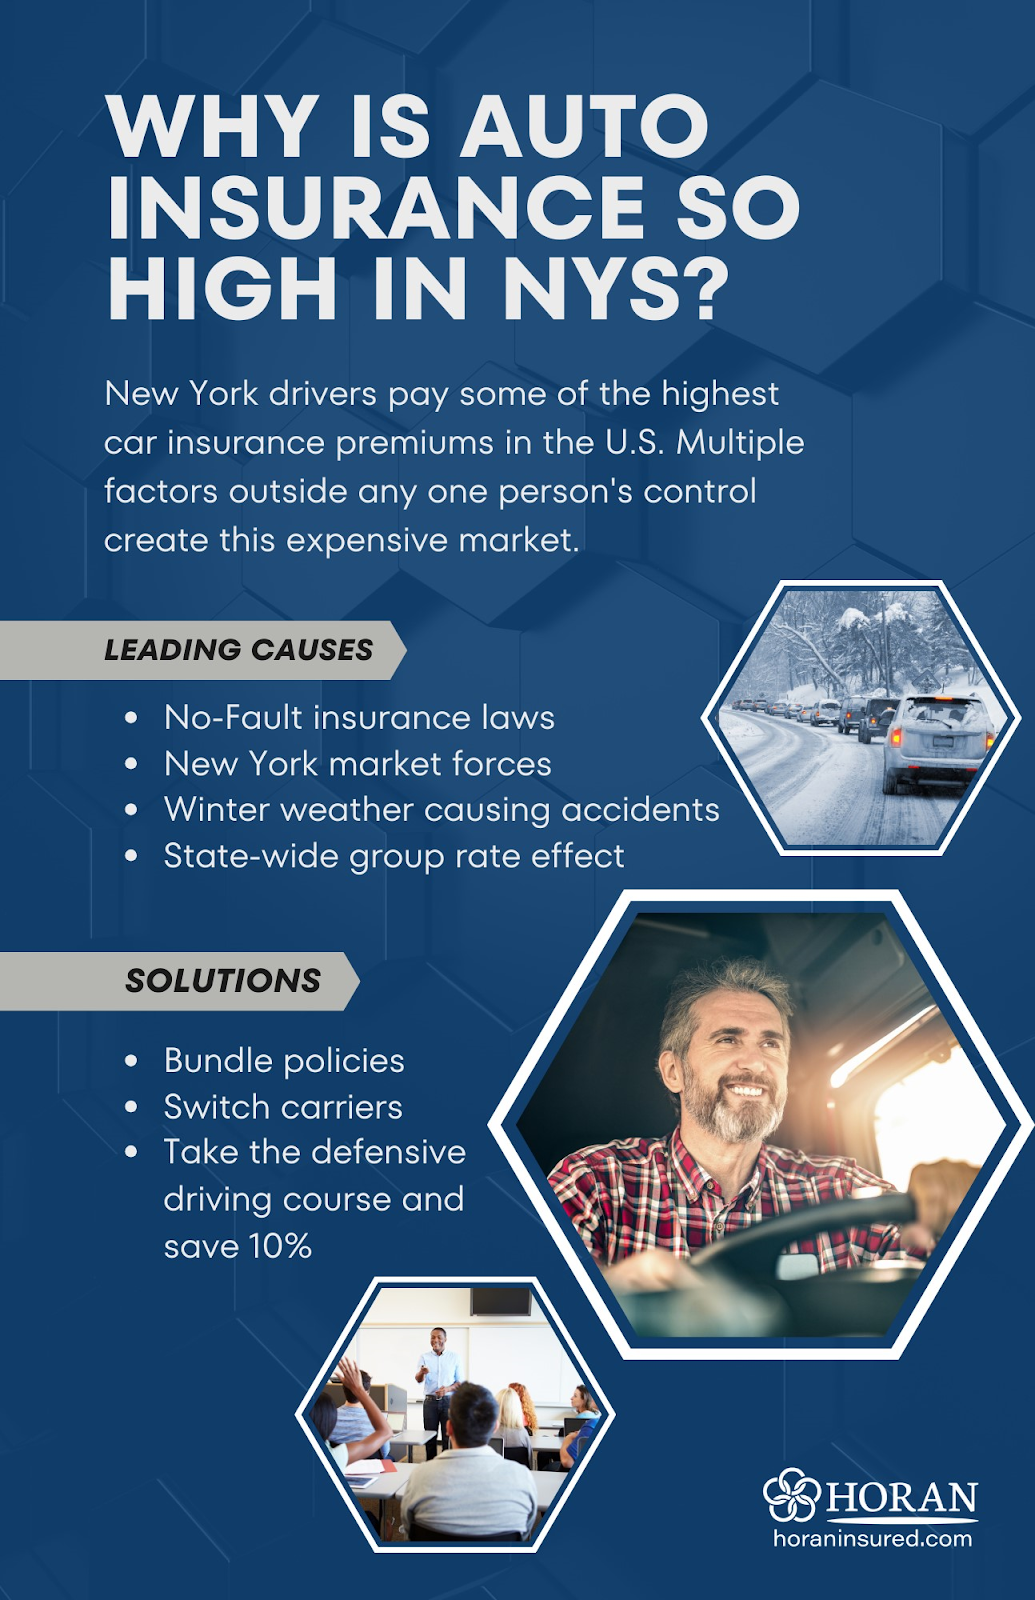 Leading causes and solutions for high auto insurance costs in NYS.